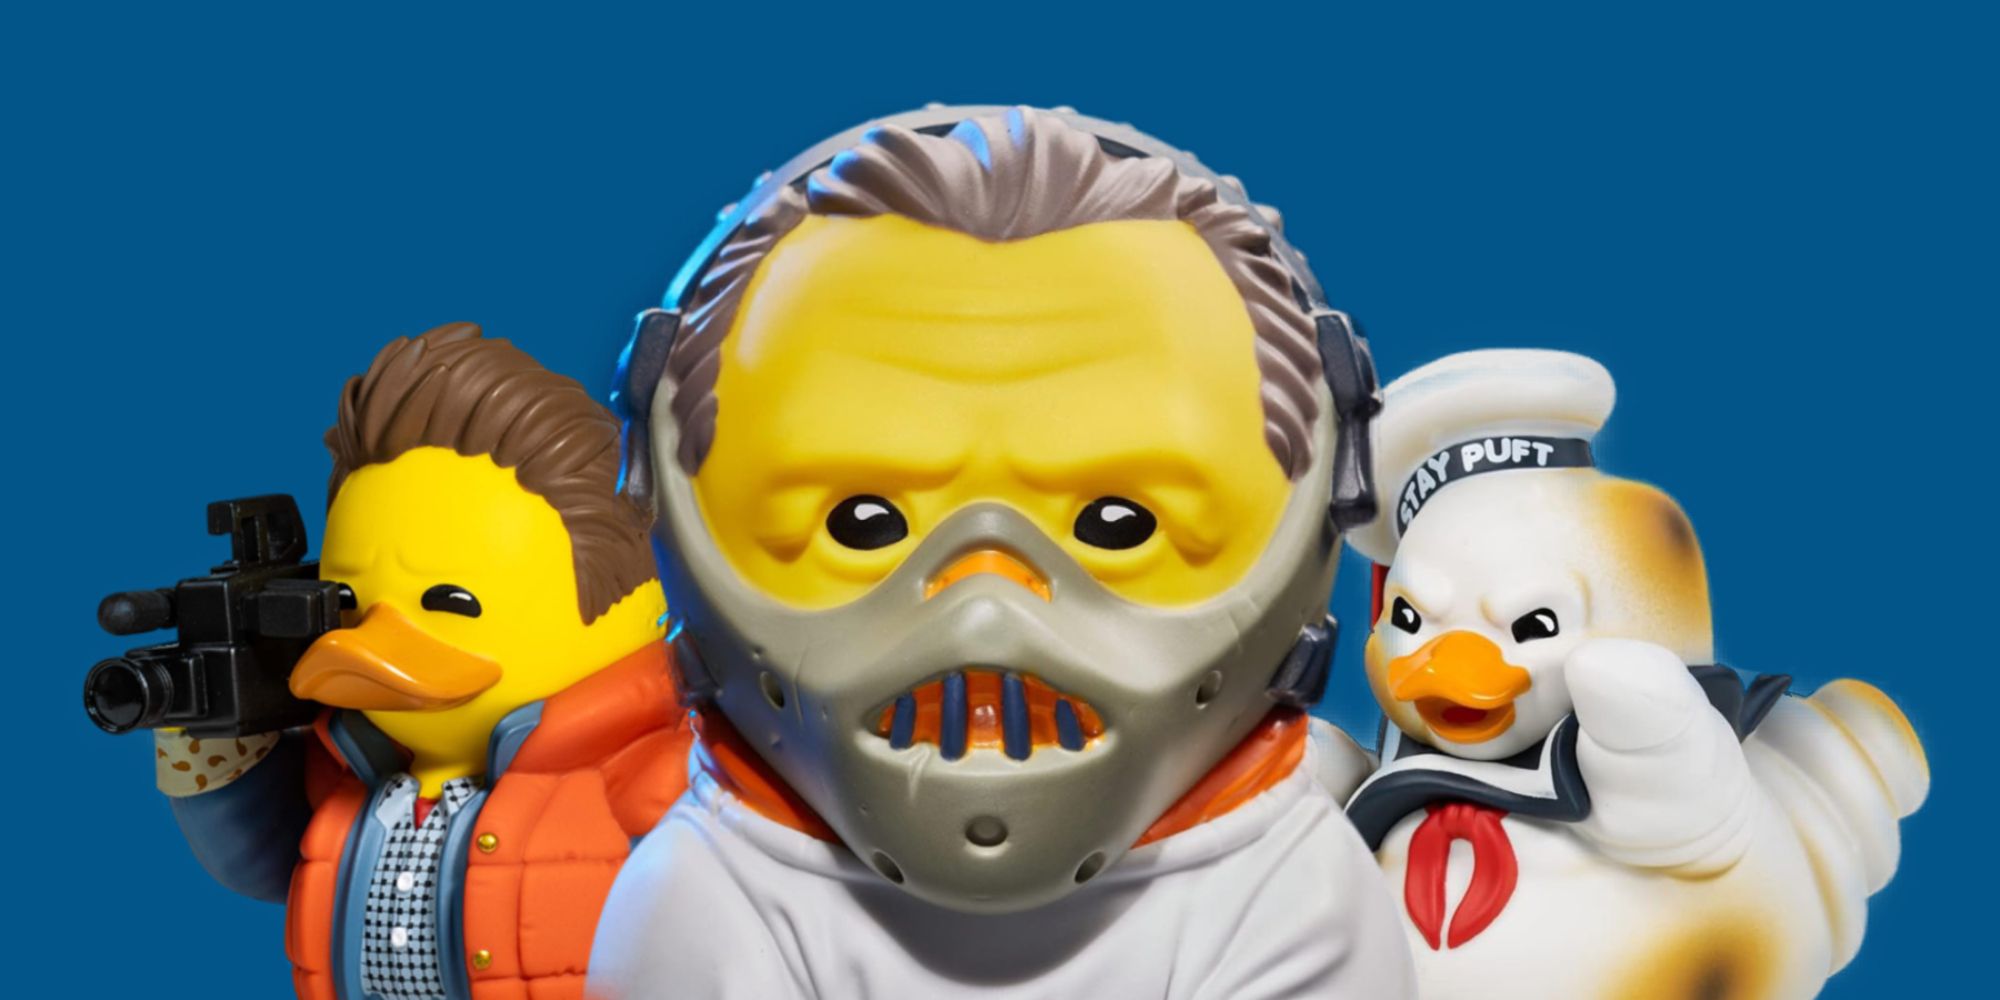 Tubbz Movie-Themed Duck Figure Featured Image Marty McFly, Hannibal, and Marshmallow Man Ducks Stood Together